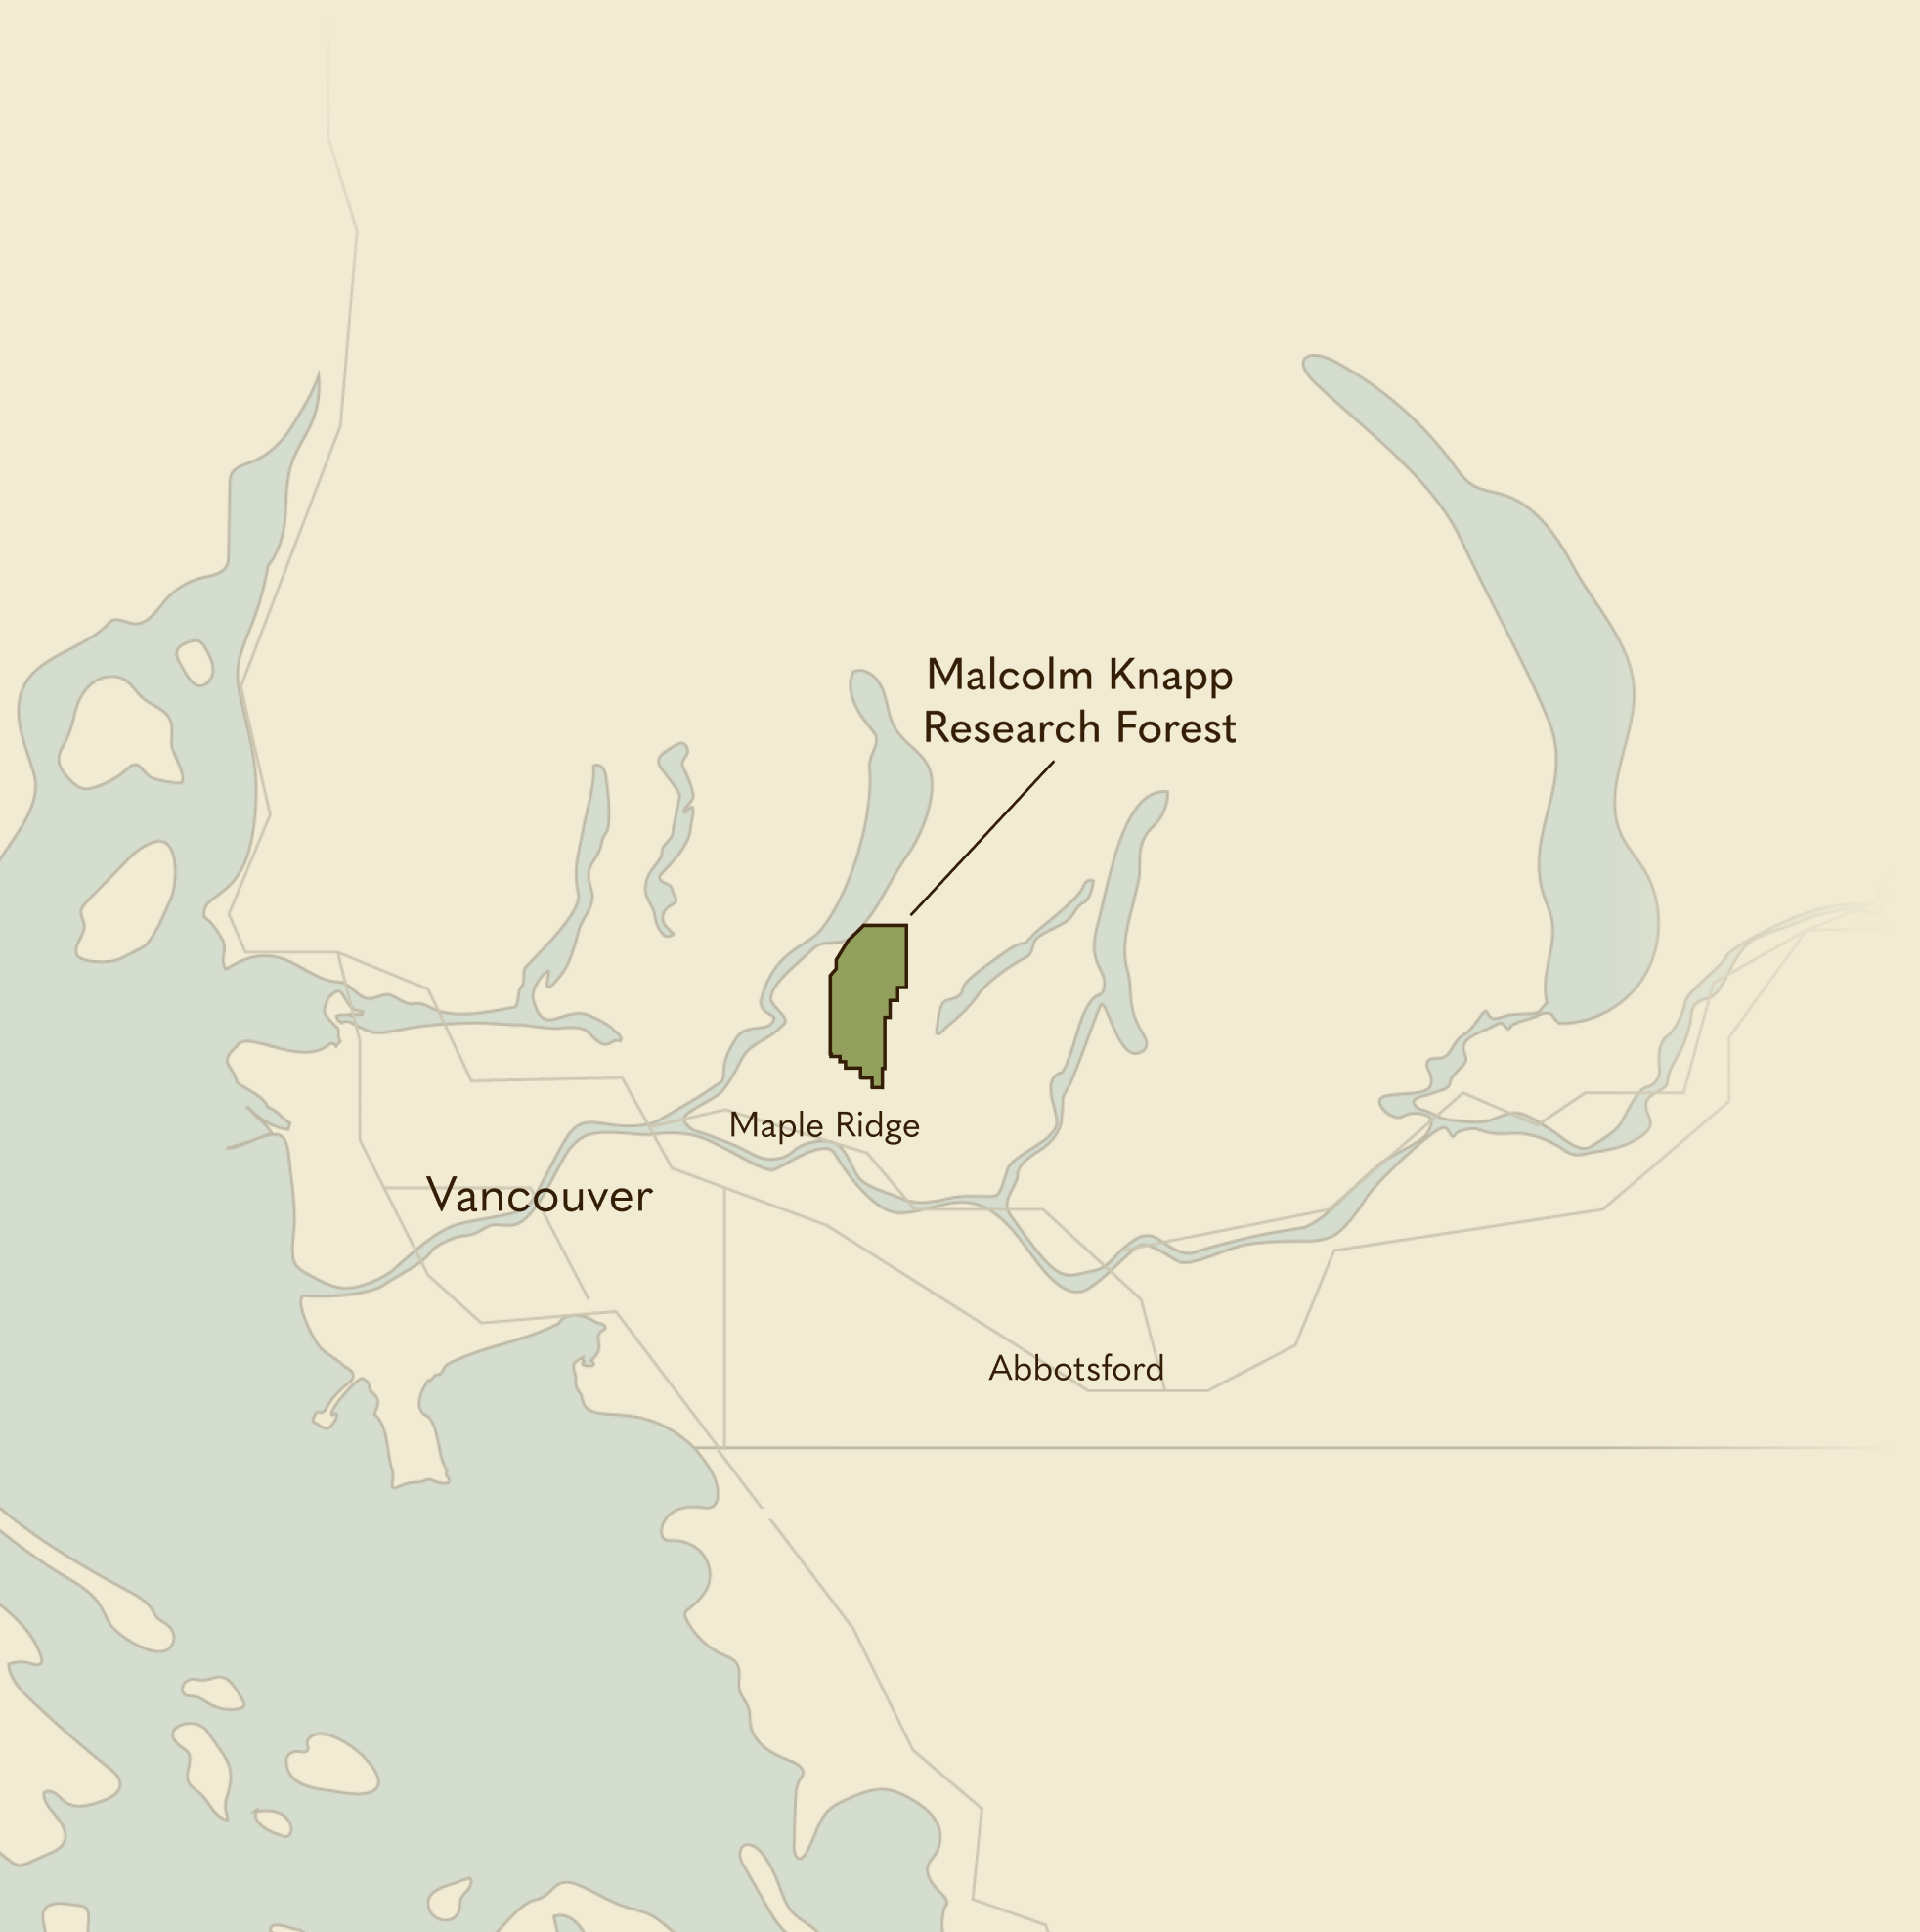 Map of where the Malcom Knapp Research Forest is located in relationship to Maple Ridge, Vancouver, and Abbotsford